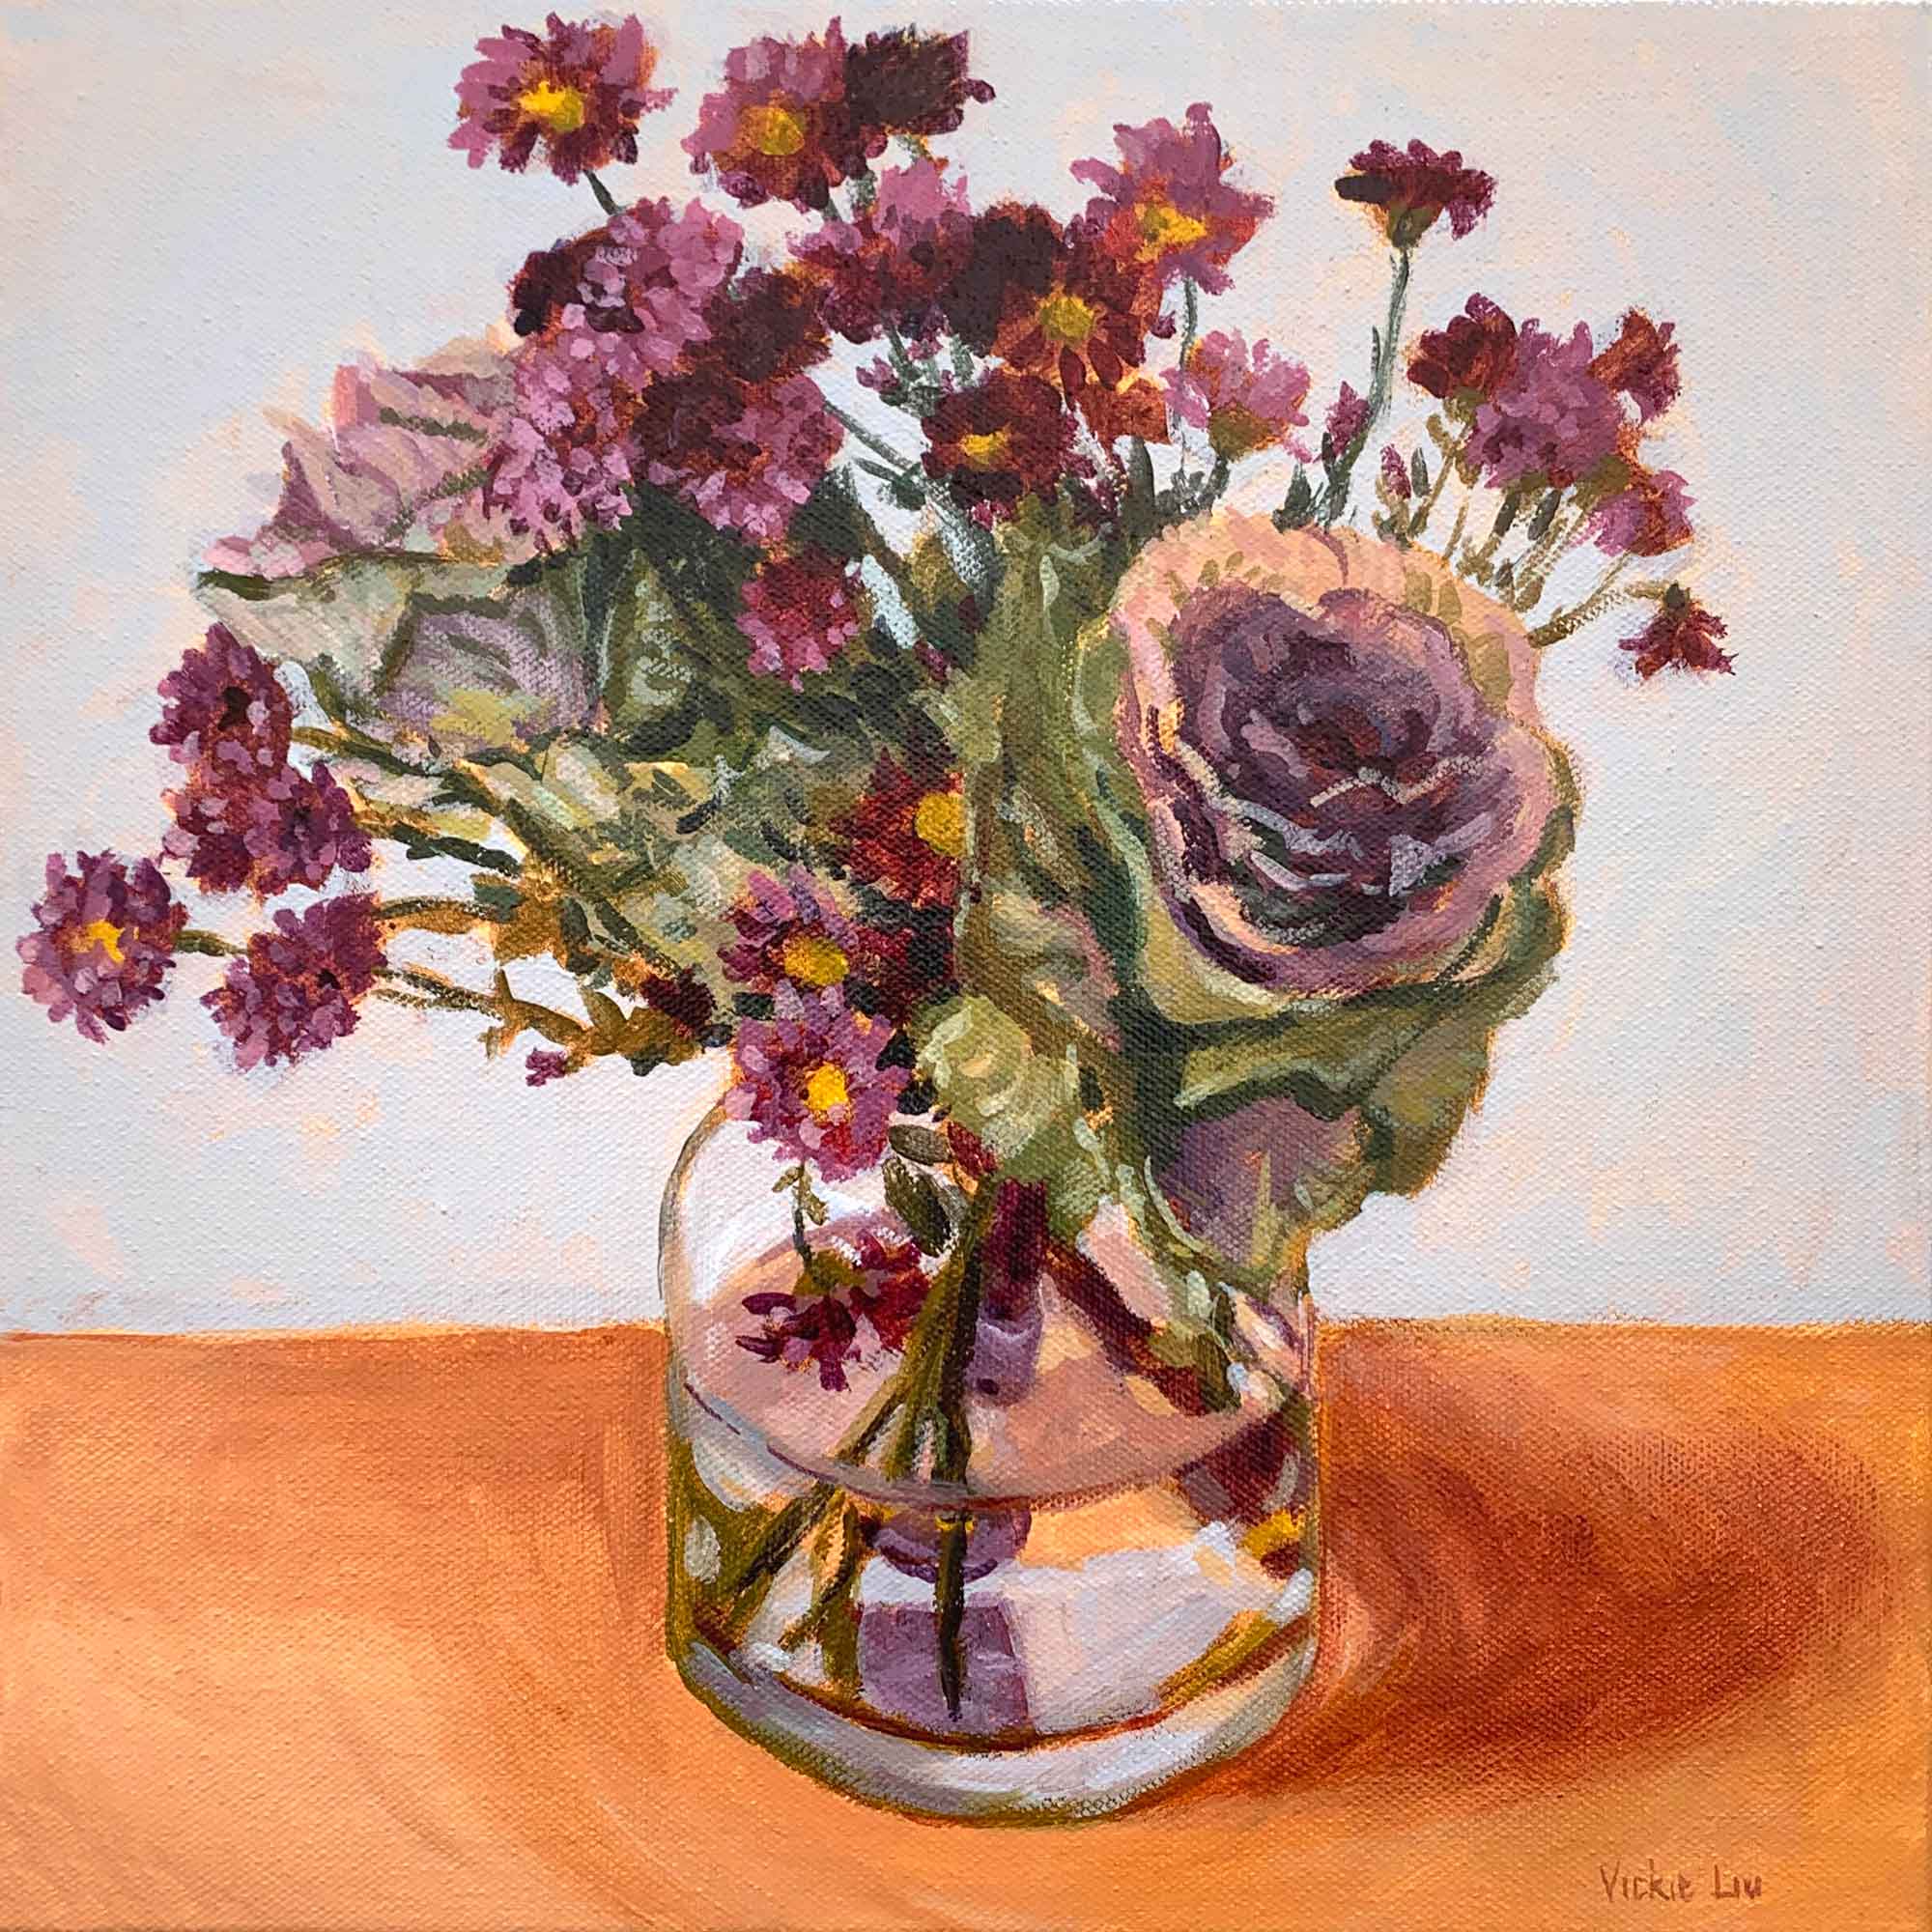 Vickie Liu Purple Cabbage And Daisy Bouquet Still Life Painting 30x30cm